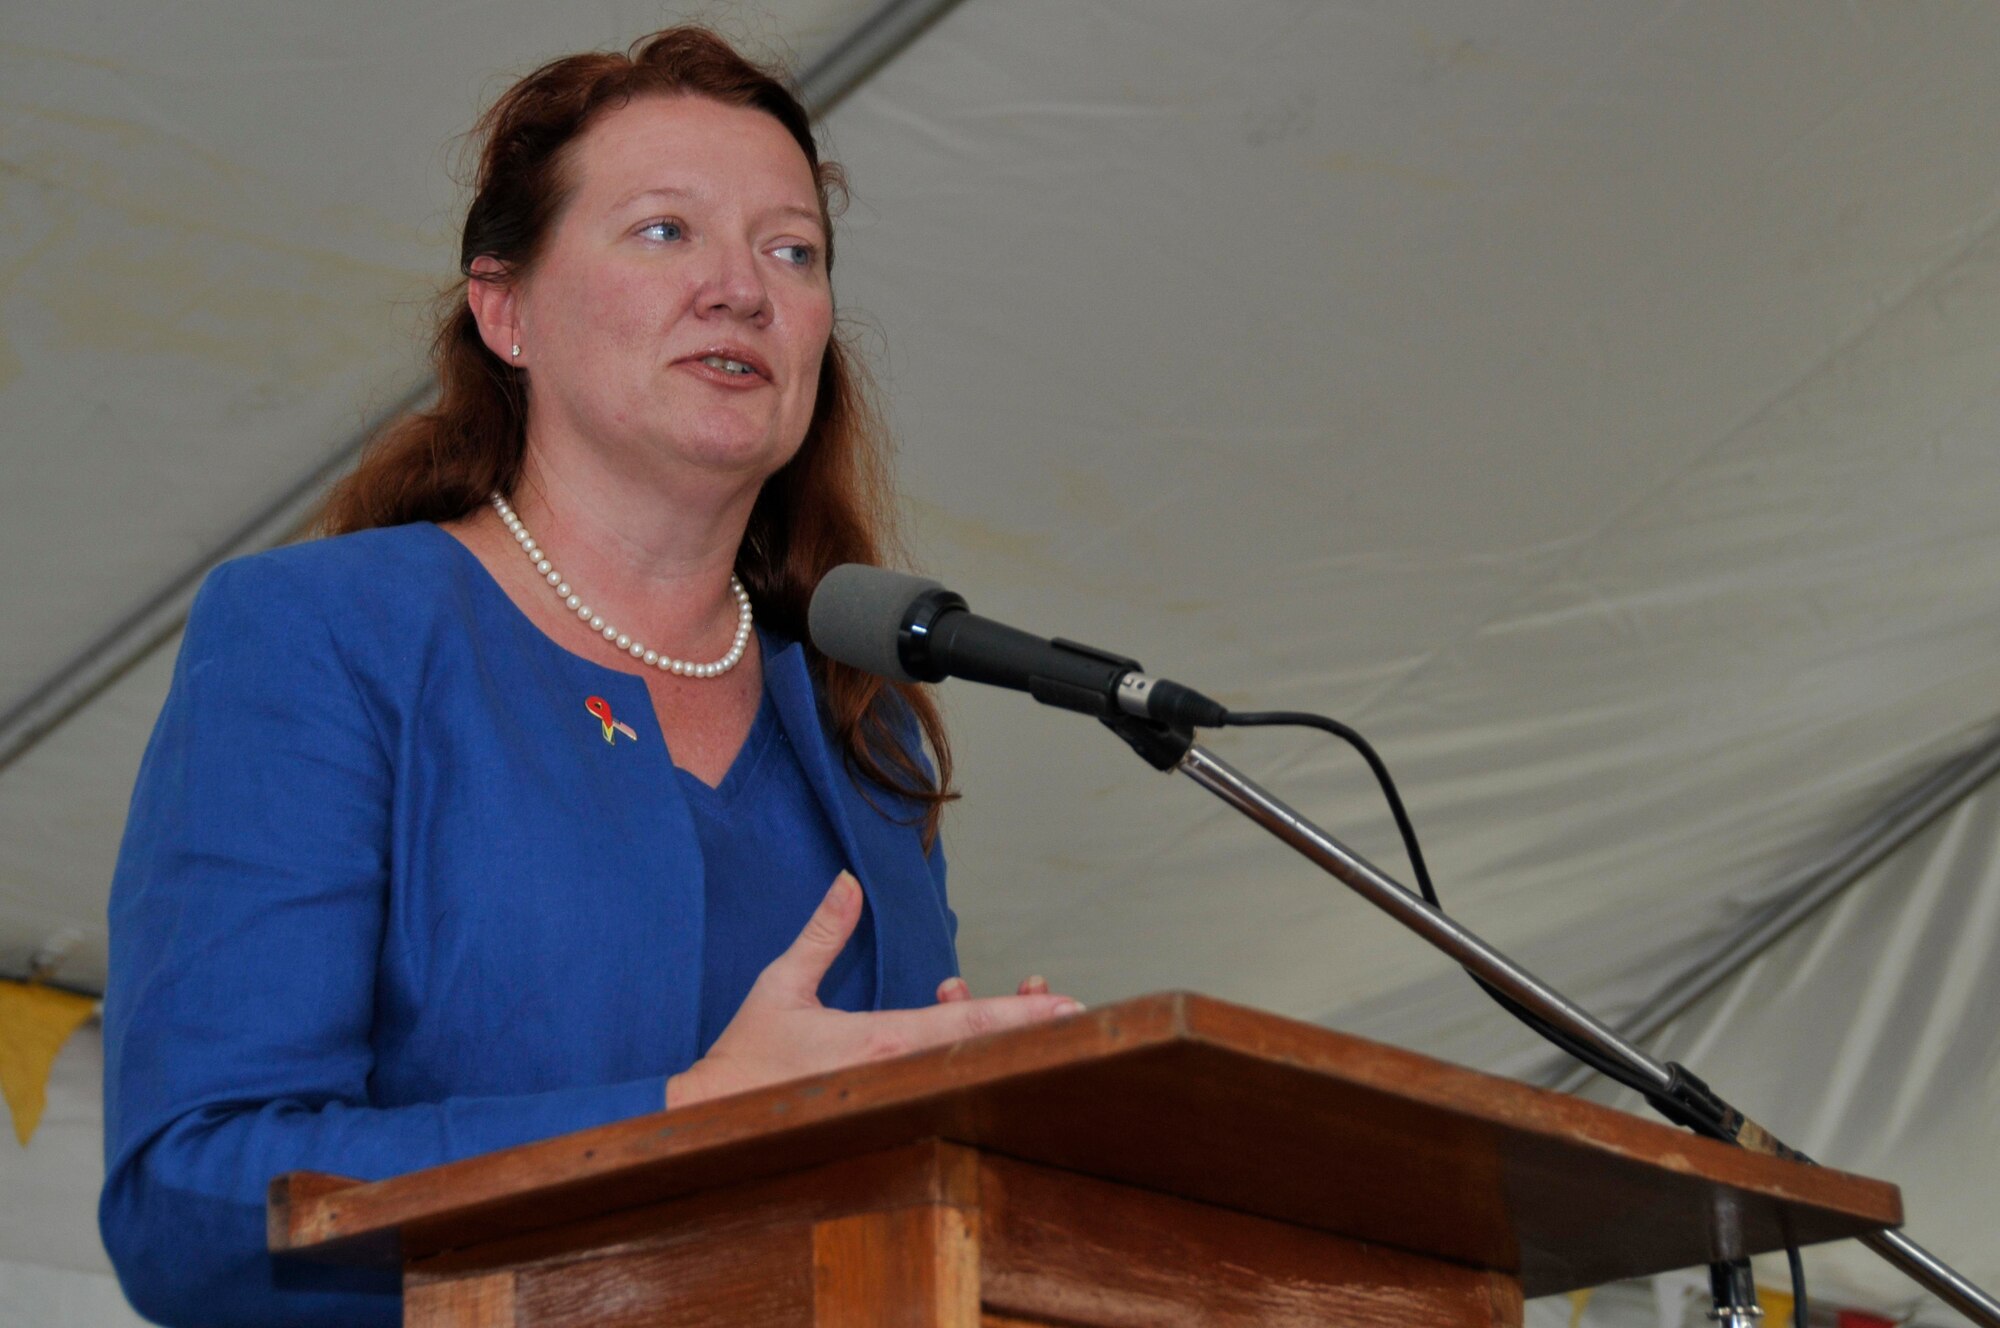 Karen Williams, U.S. Embassy Charg? d'Affaires, speaks during the opening ceremony of the new La Pentinence Medical Clinic Sept. 10, 2009, in Georgetown, Guyana. The $350,000 structure was built by Soldiers of Georgia Army National Guard.  (U.S. Air Force photo by Airman 1st Class Perry Aston) (Released)